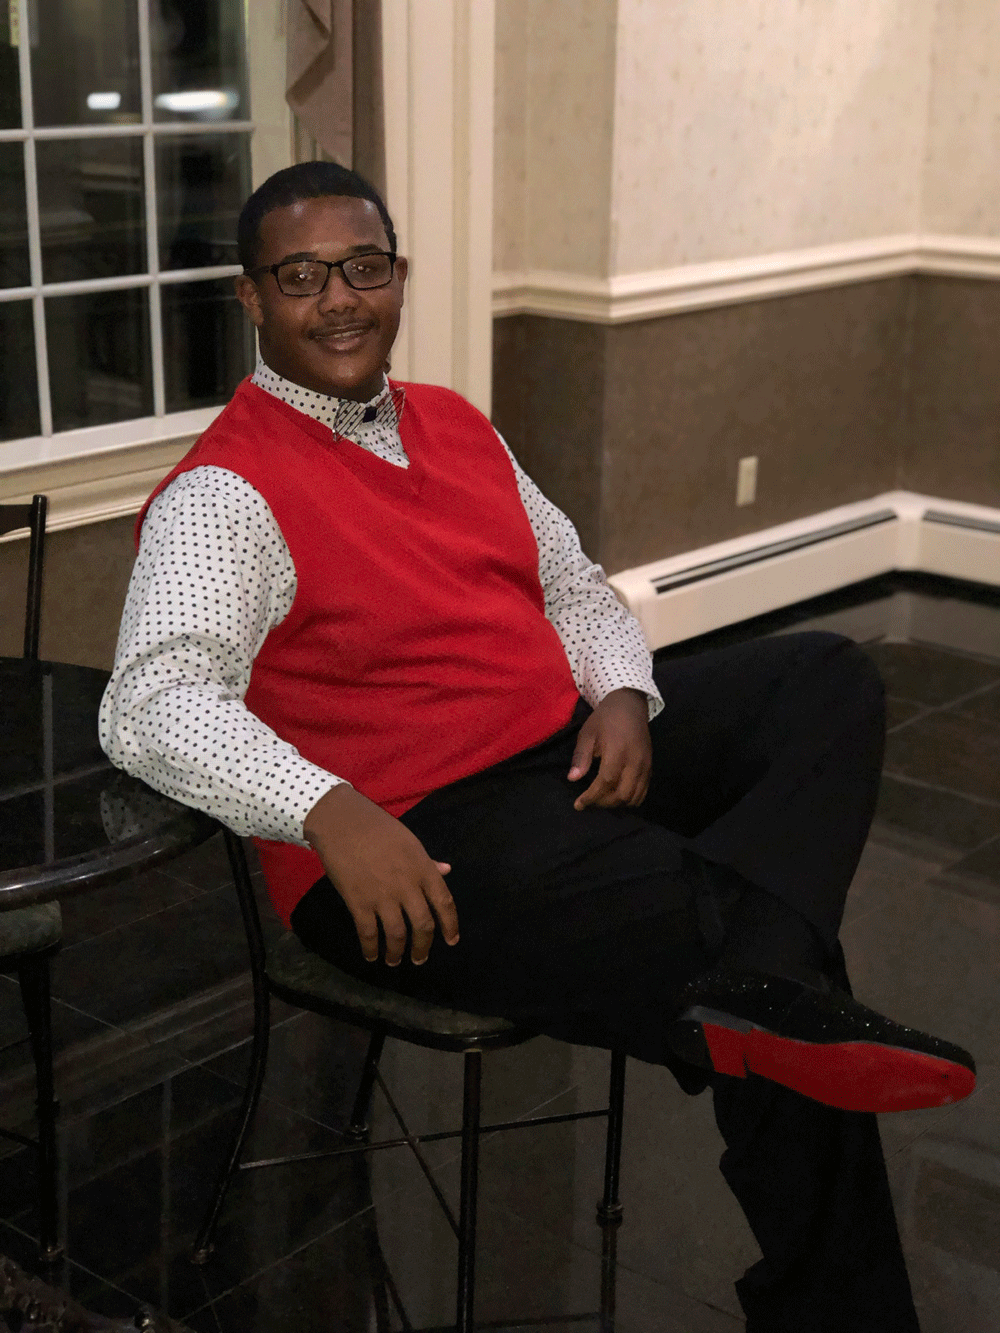 Jamar Green sits and smiles, wearing a red vest.